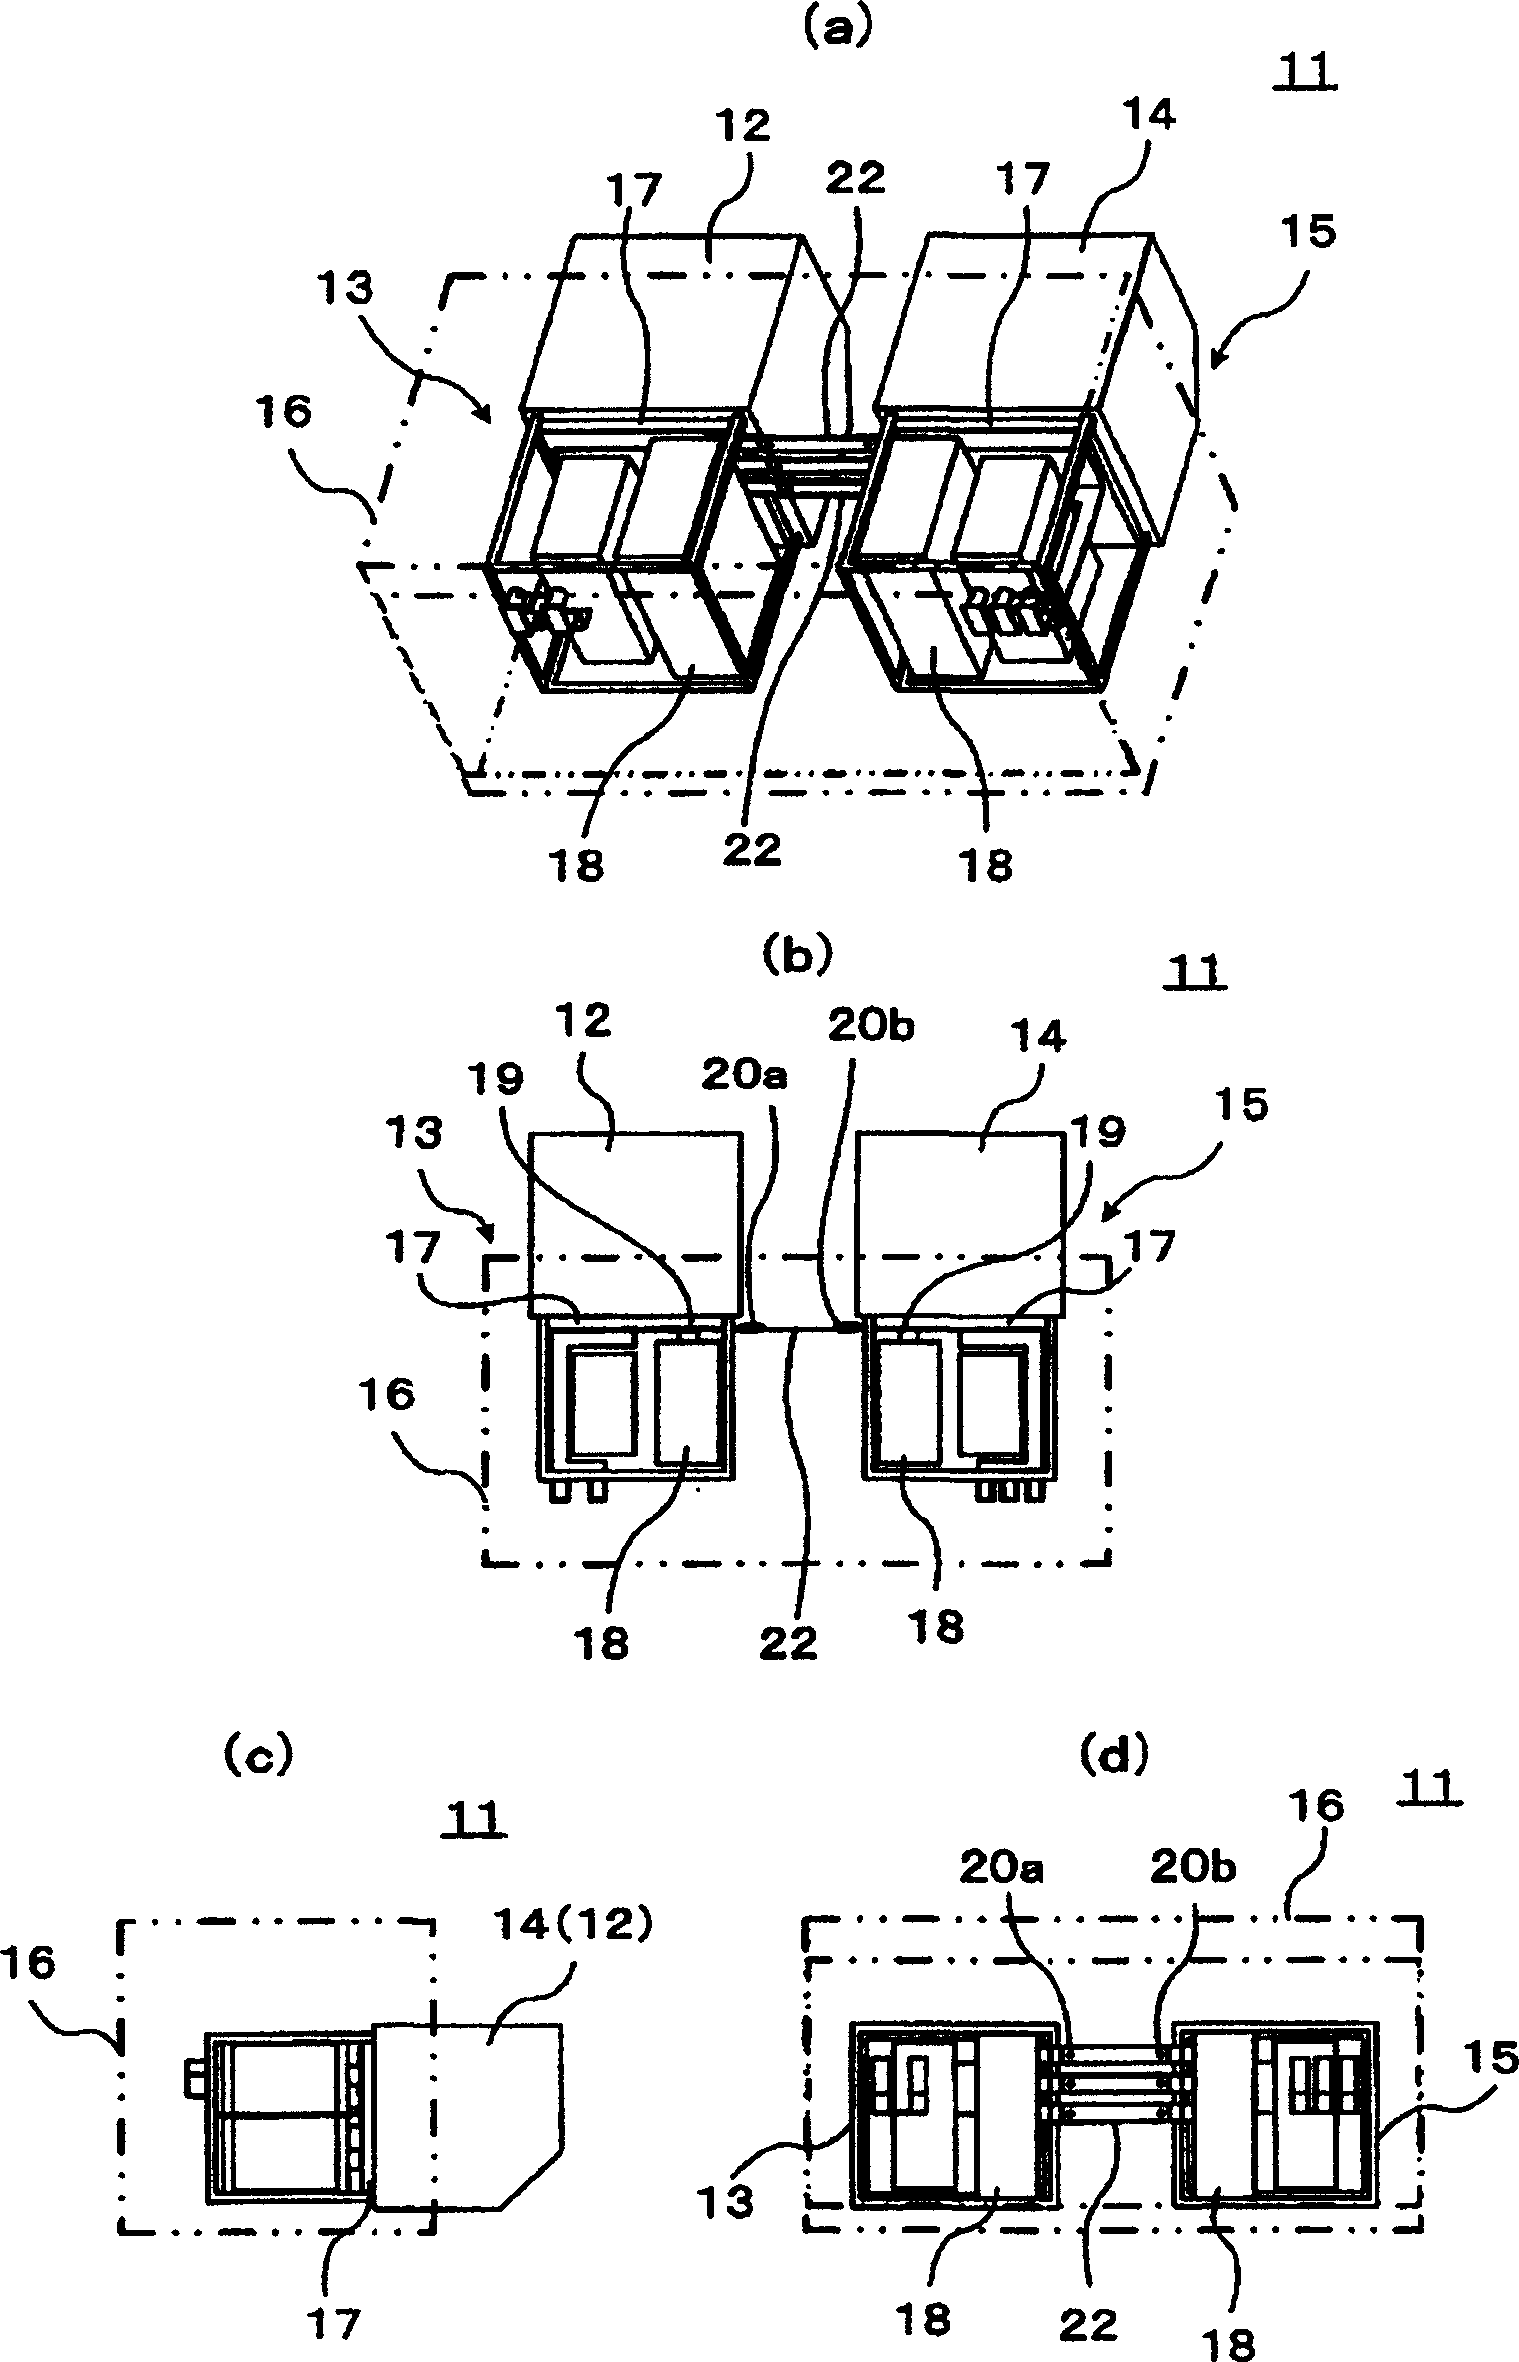 Power shifter for railway vehicle